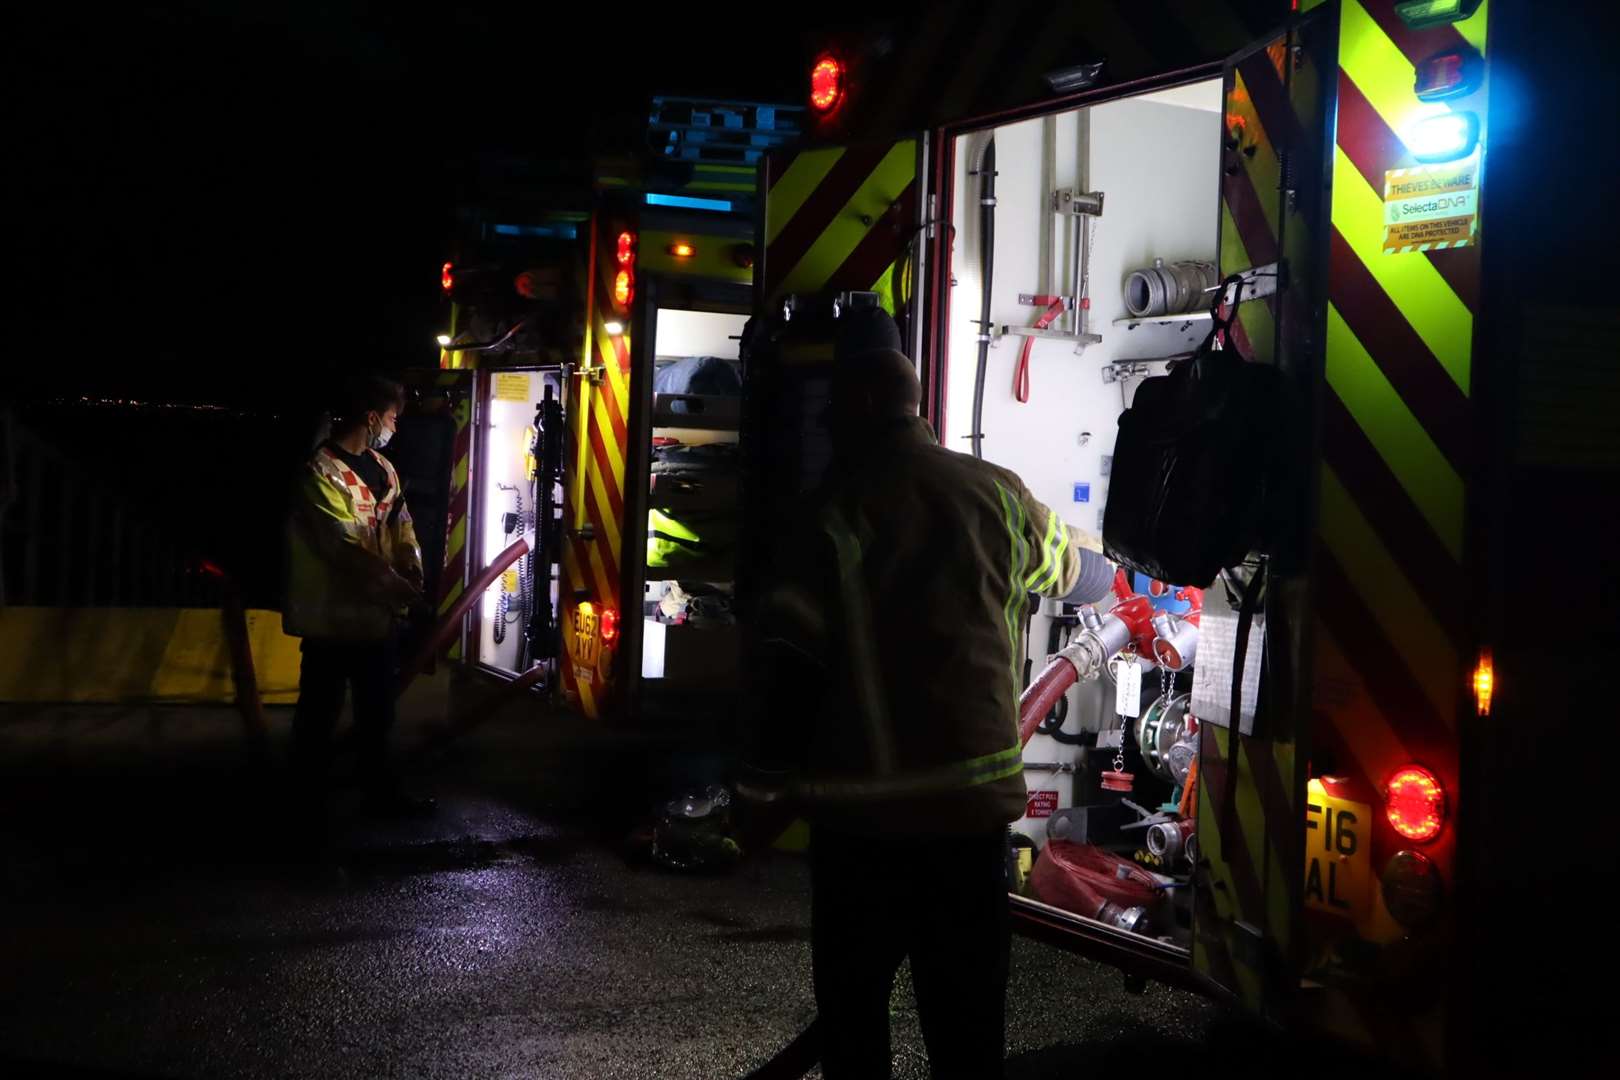 Fire engines on the scene at night. Stock photo